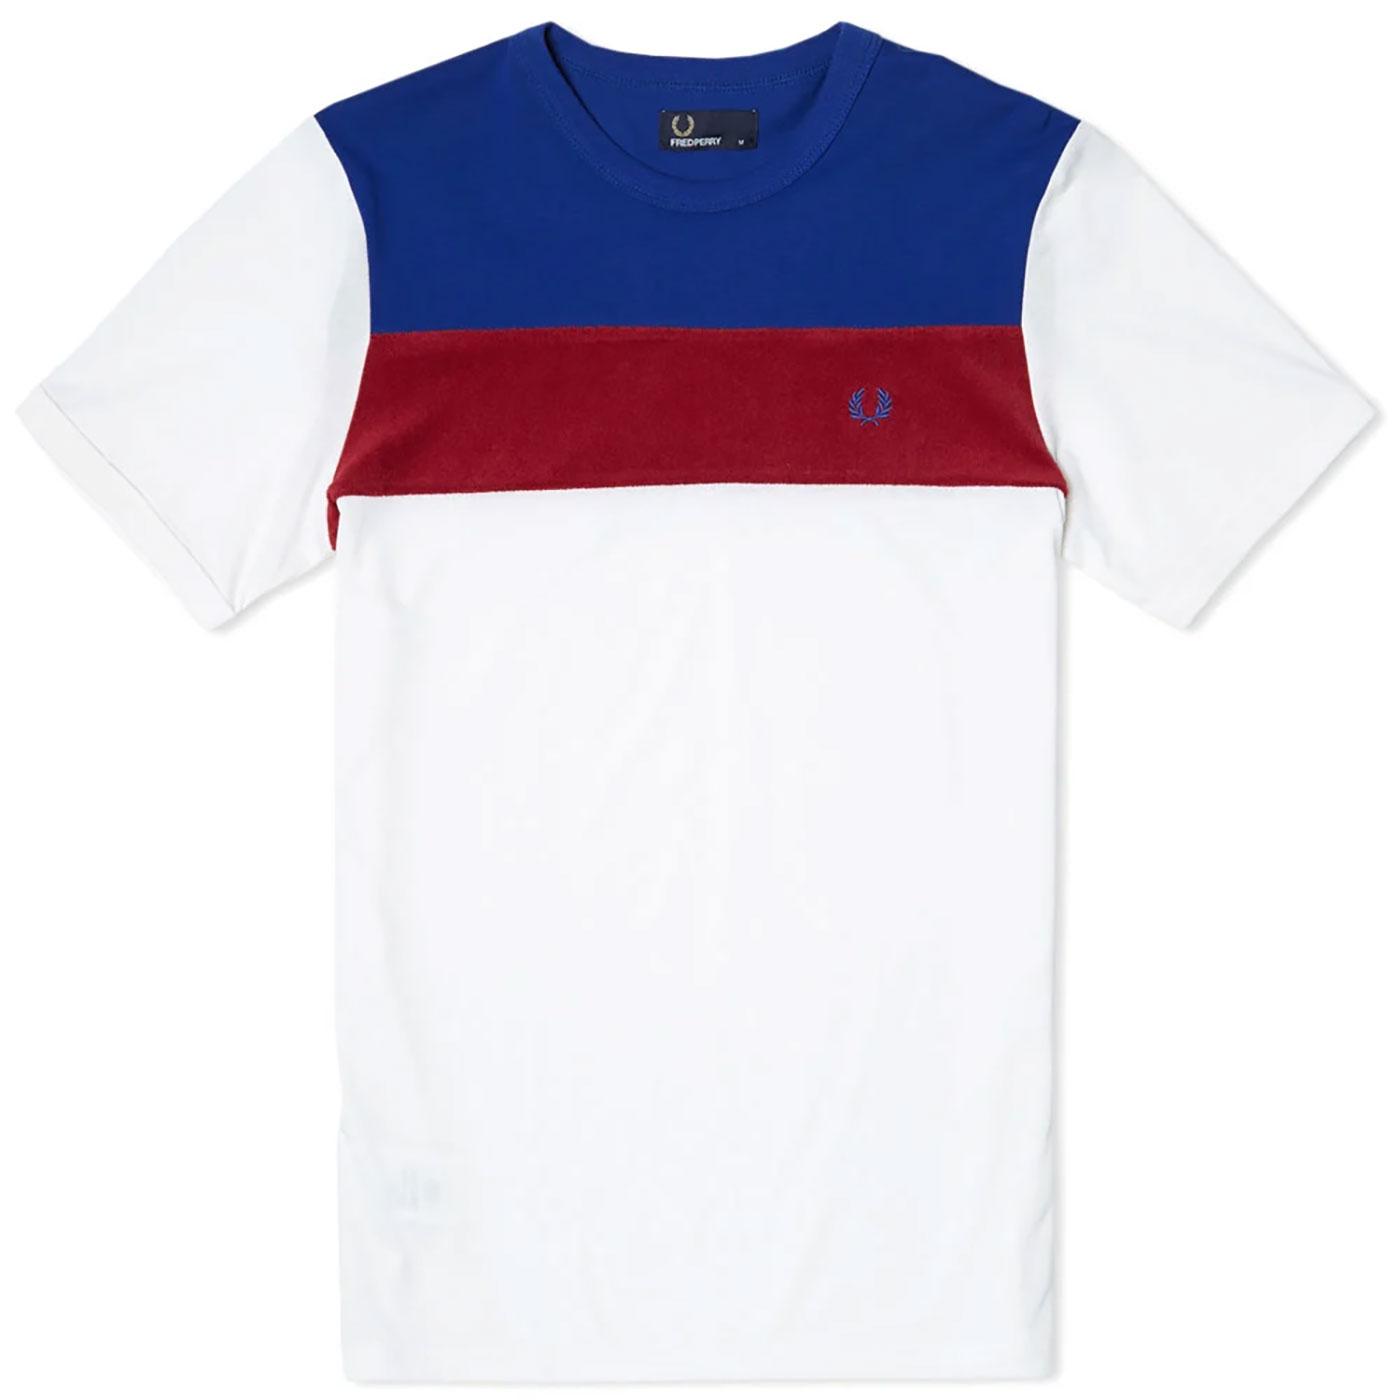 FRED PERRY Mens Cut & Sew Toweling Panel T-Shirt